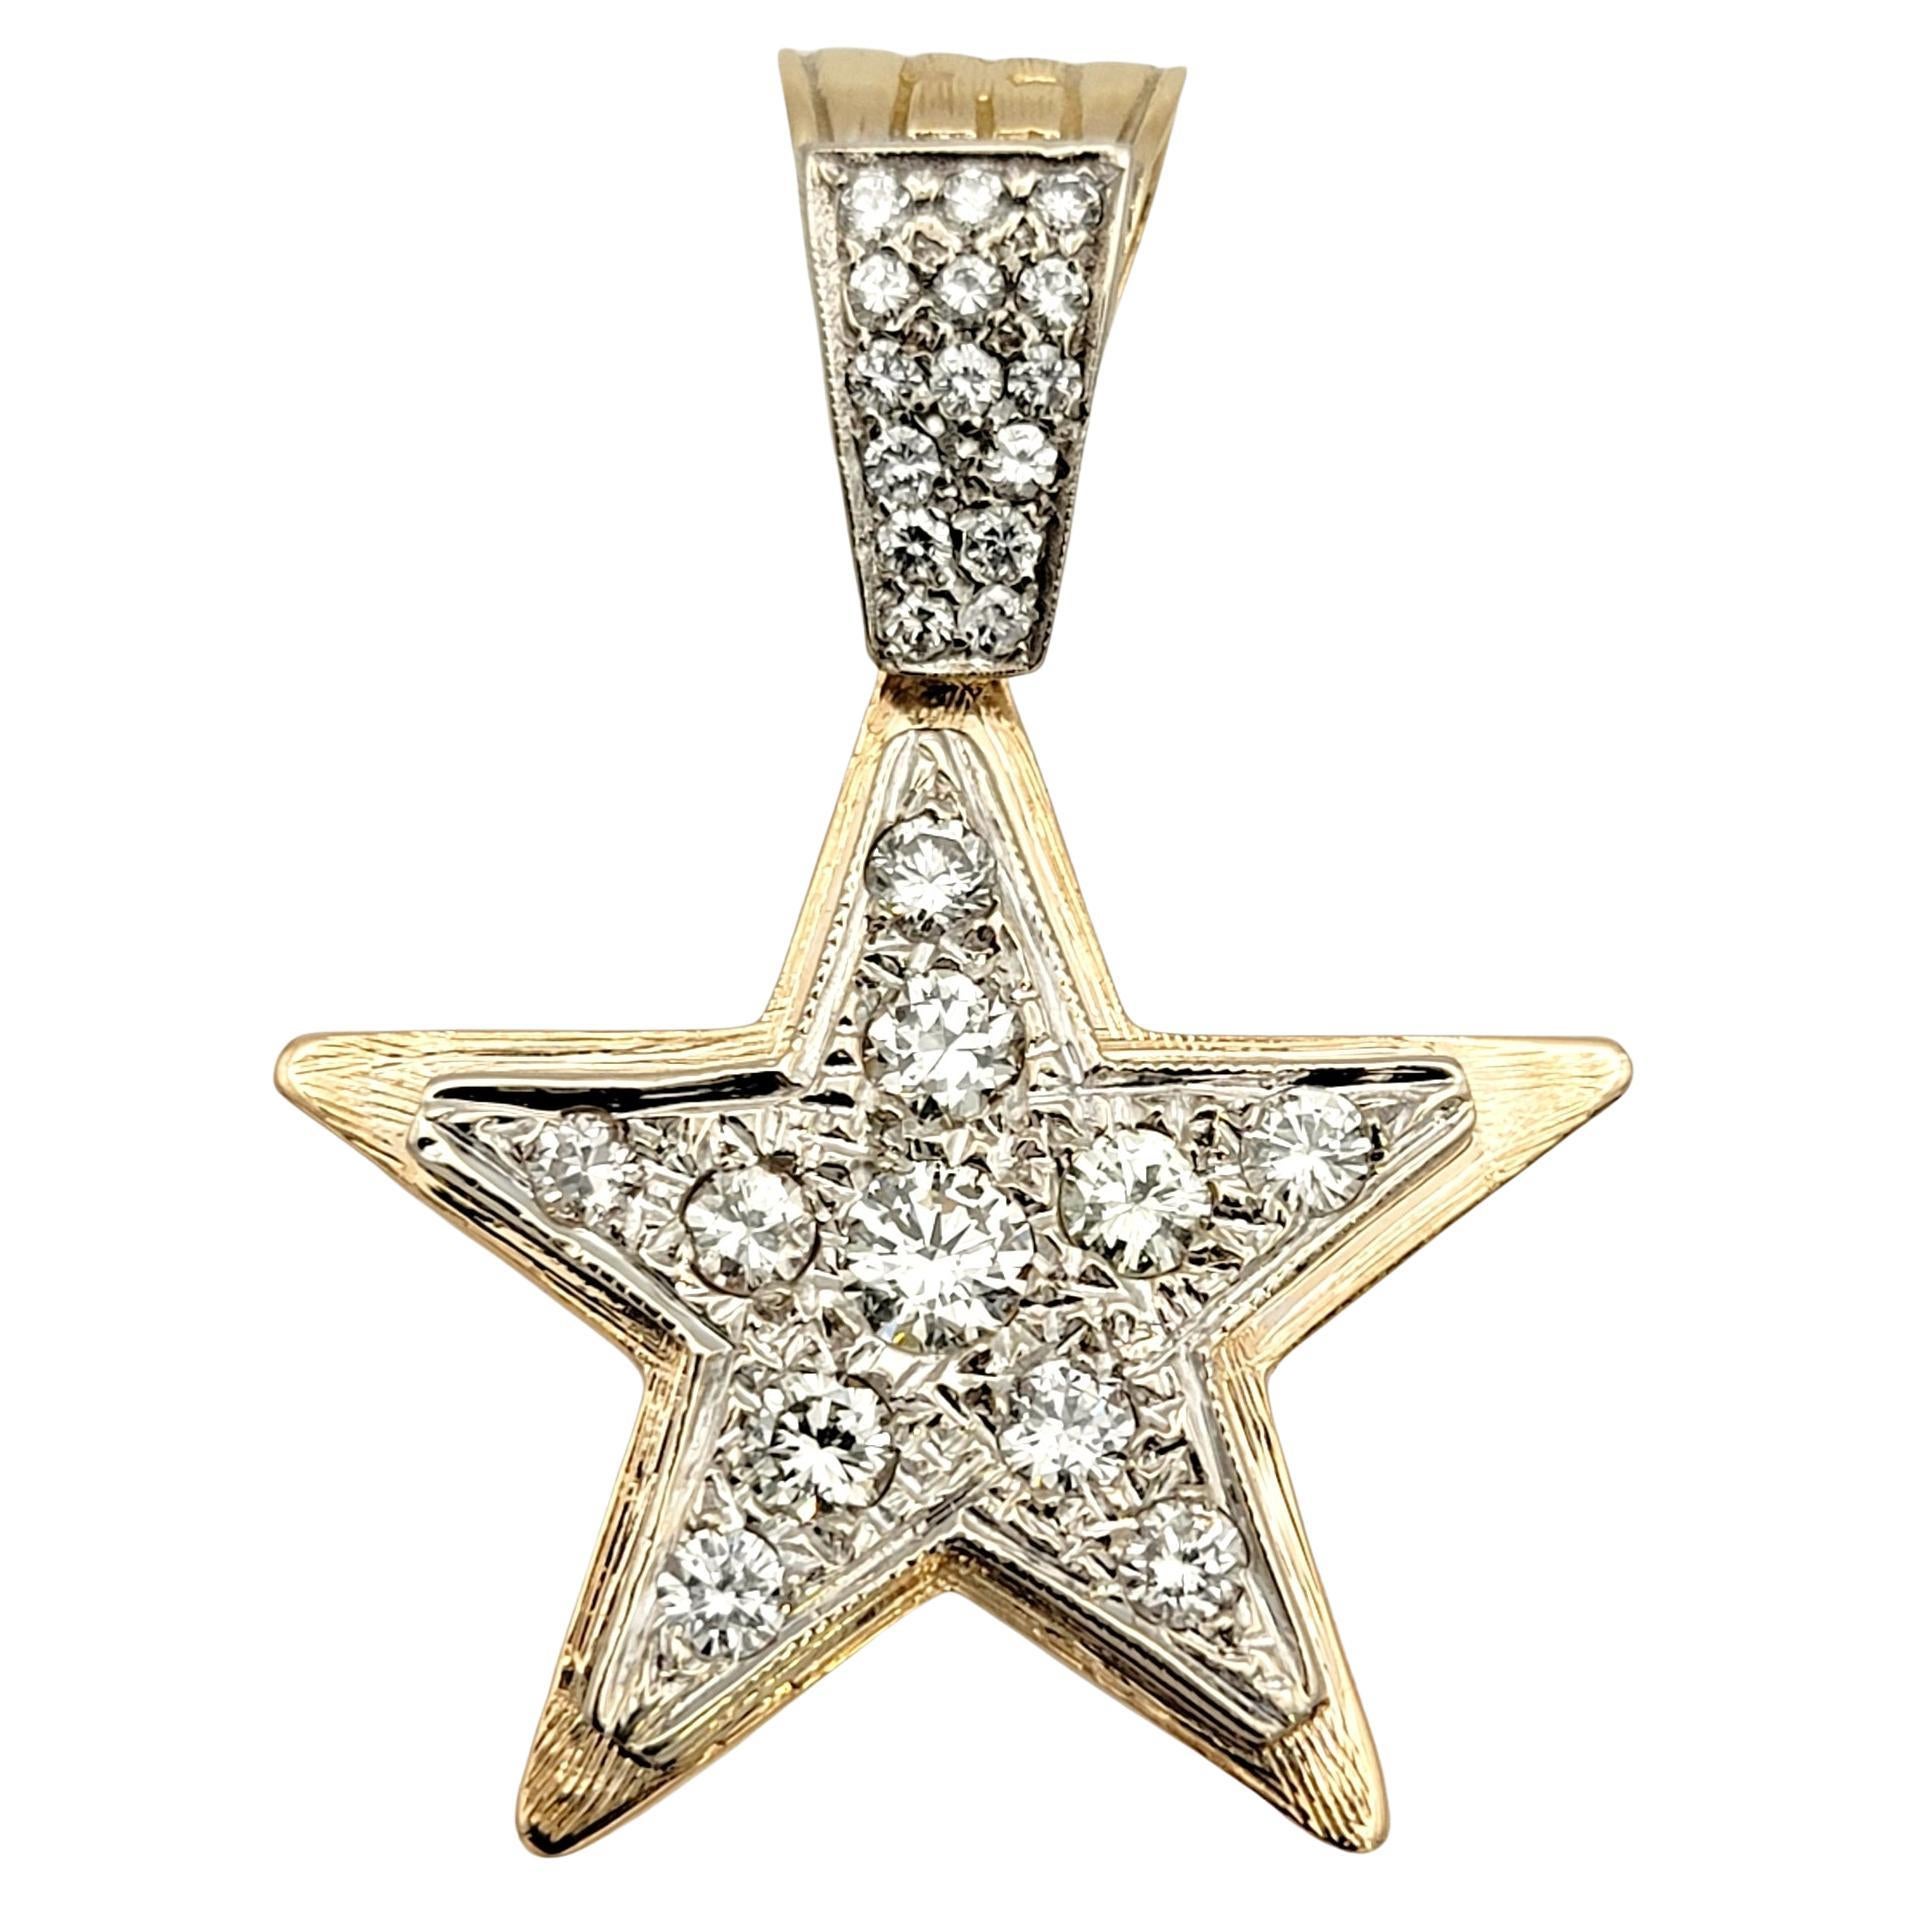 2.32 Carats Total Round Diamond Star Pendant in 14 Karat Yellow and White Gold